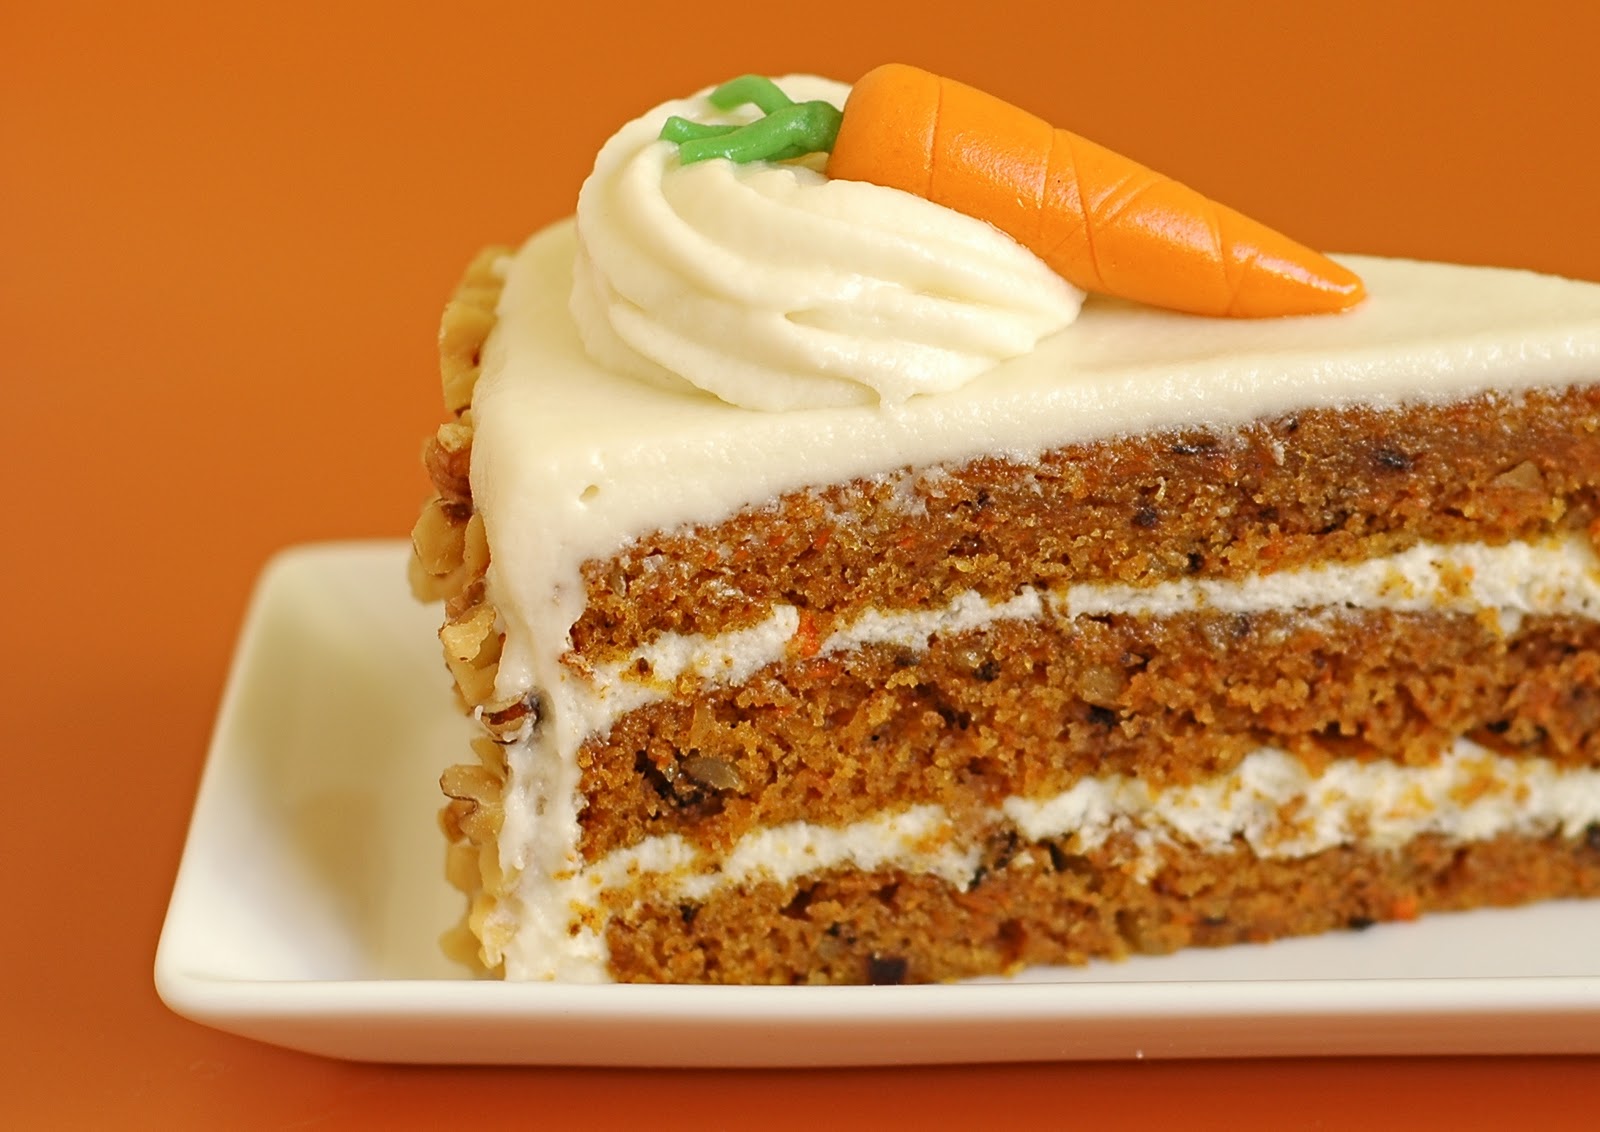 The Unexpected Culinarian: The Best Carrot Cake Ever!